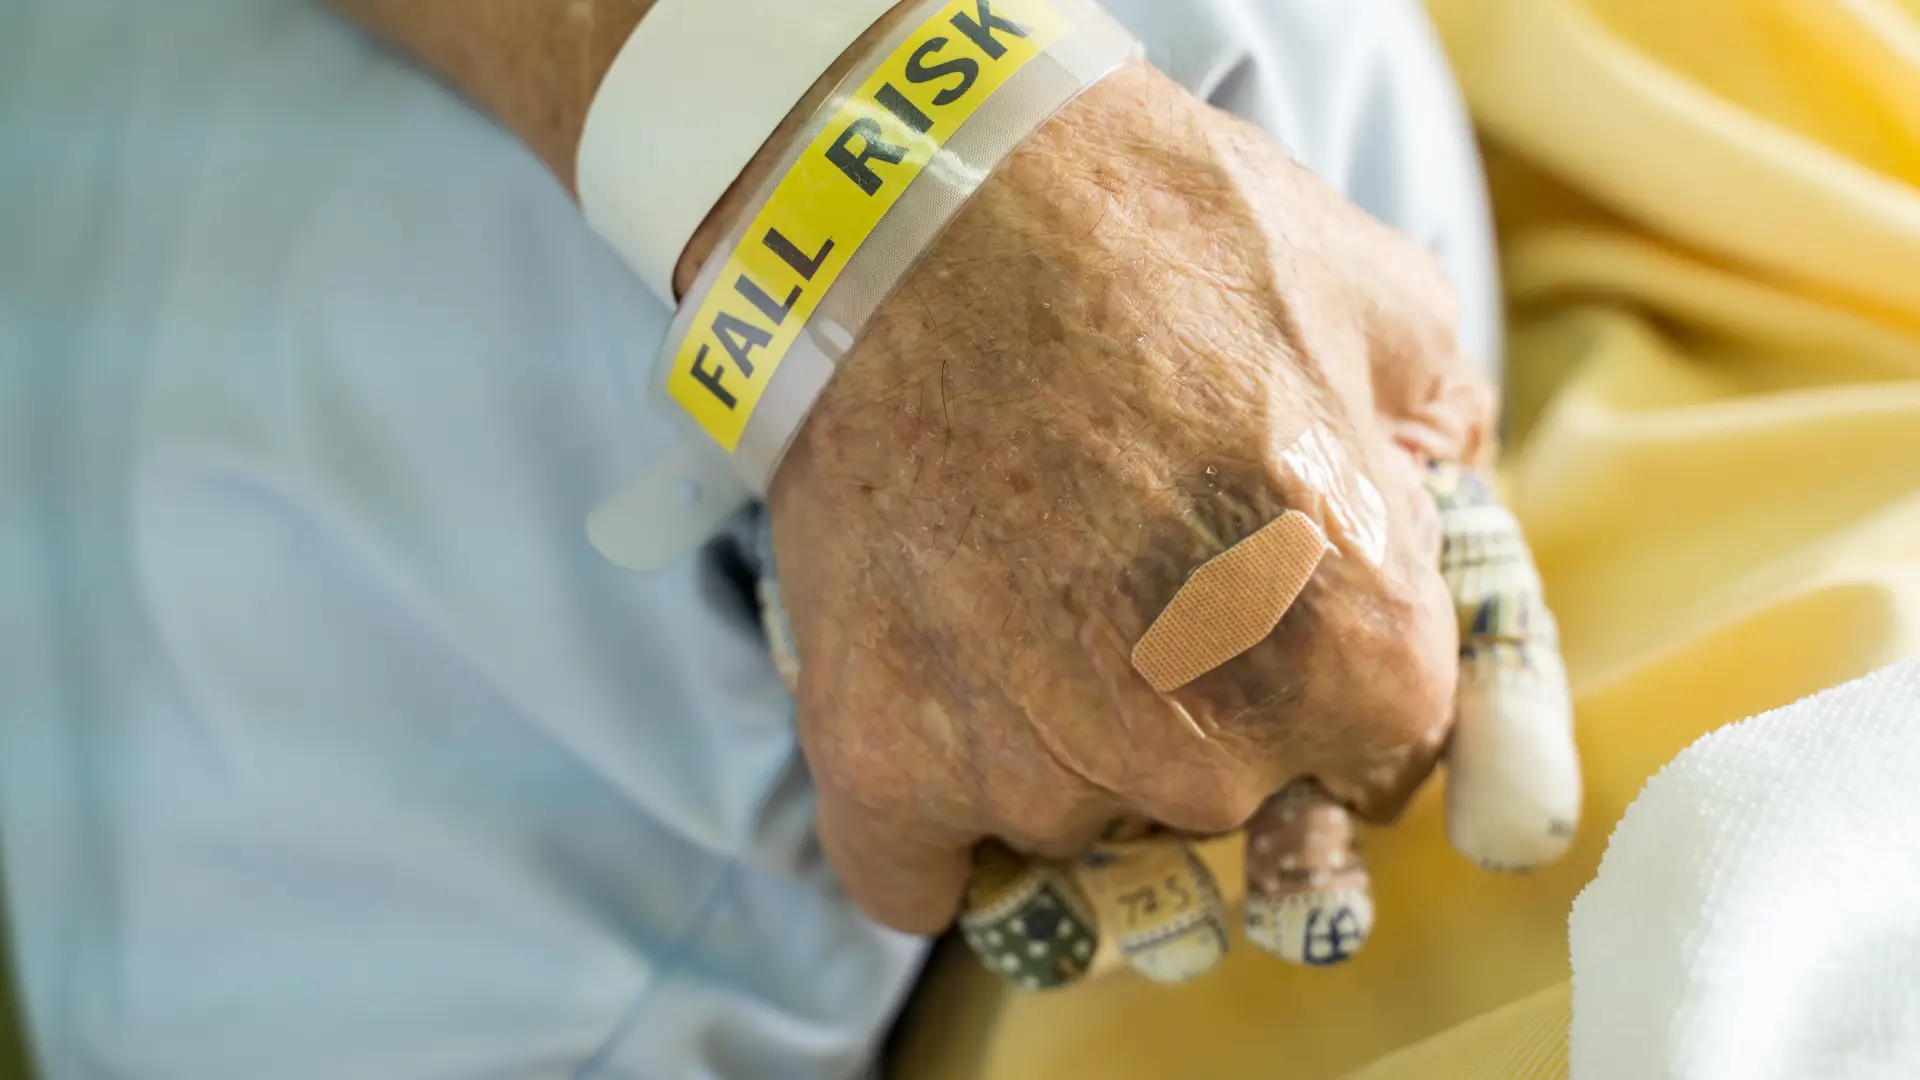 Elderly person with falls risk wrist band